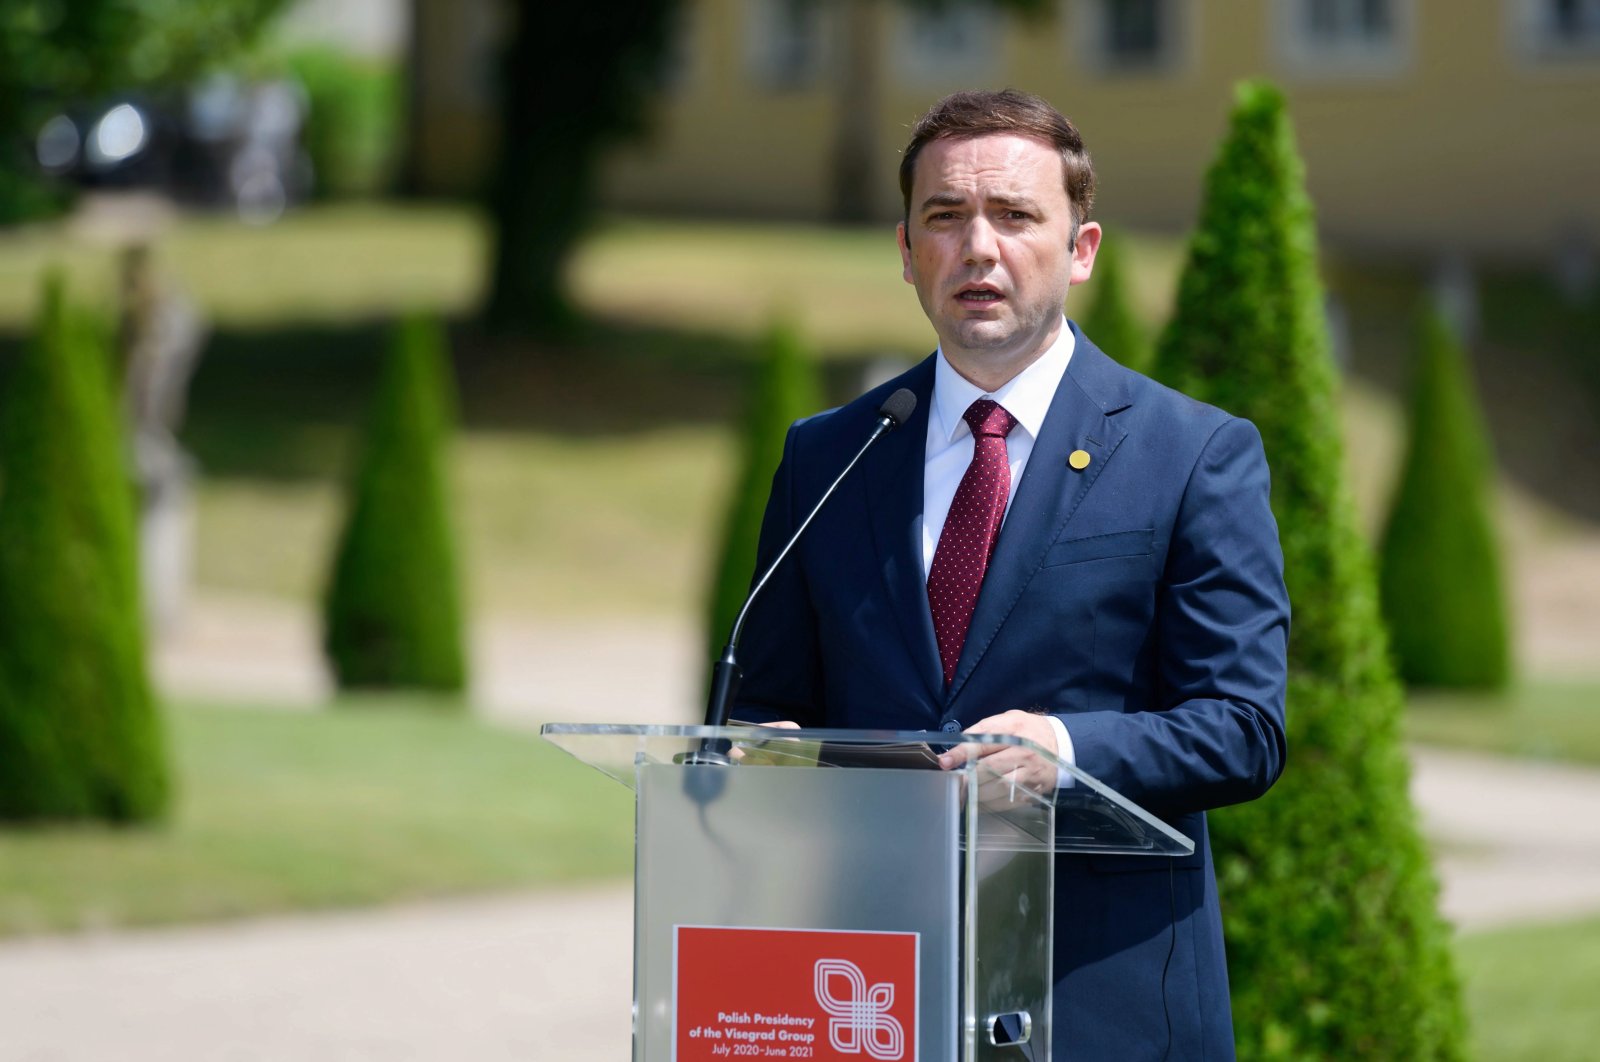 North Macedonian Foreign Minister Bujar Osmani attends a press conference after the Visegrad Group and Western Balkans foreign ministers meeting in Rogalin, western Poland, June 28, 2021. (EPA Photo)